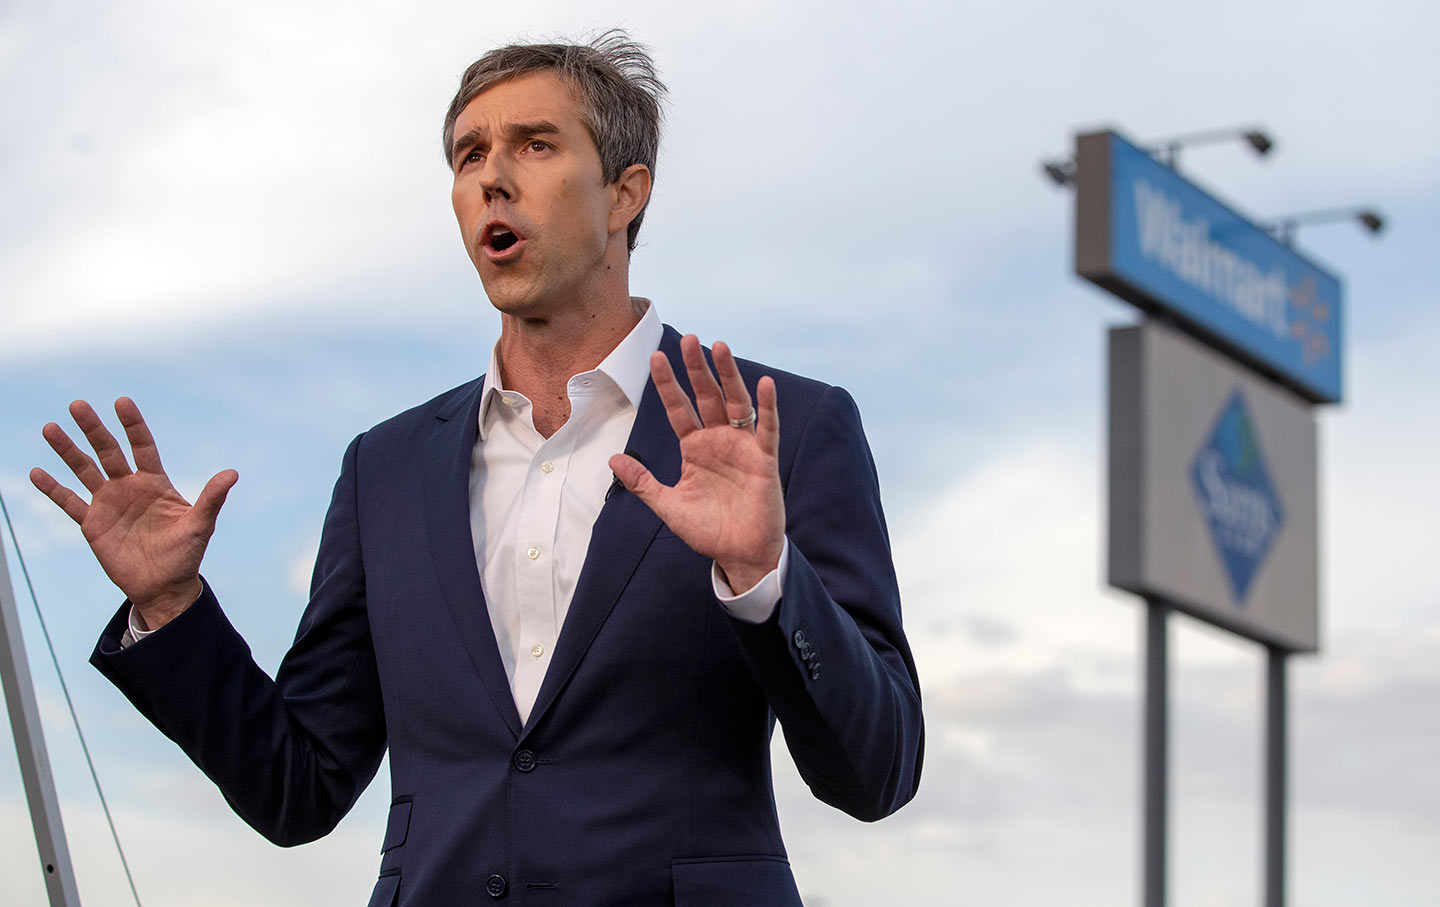 After the Mass Shooting in El Paso, Beto O’Rourke Asks the Right Question: WTF, Media?